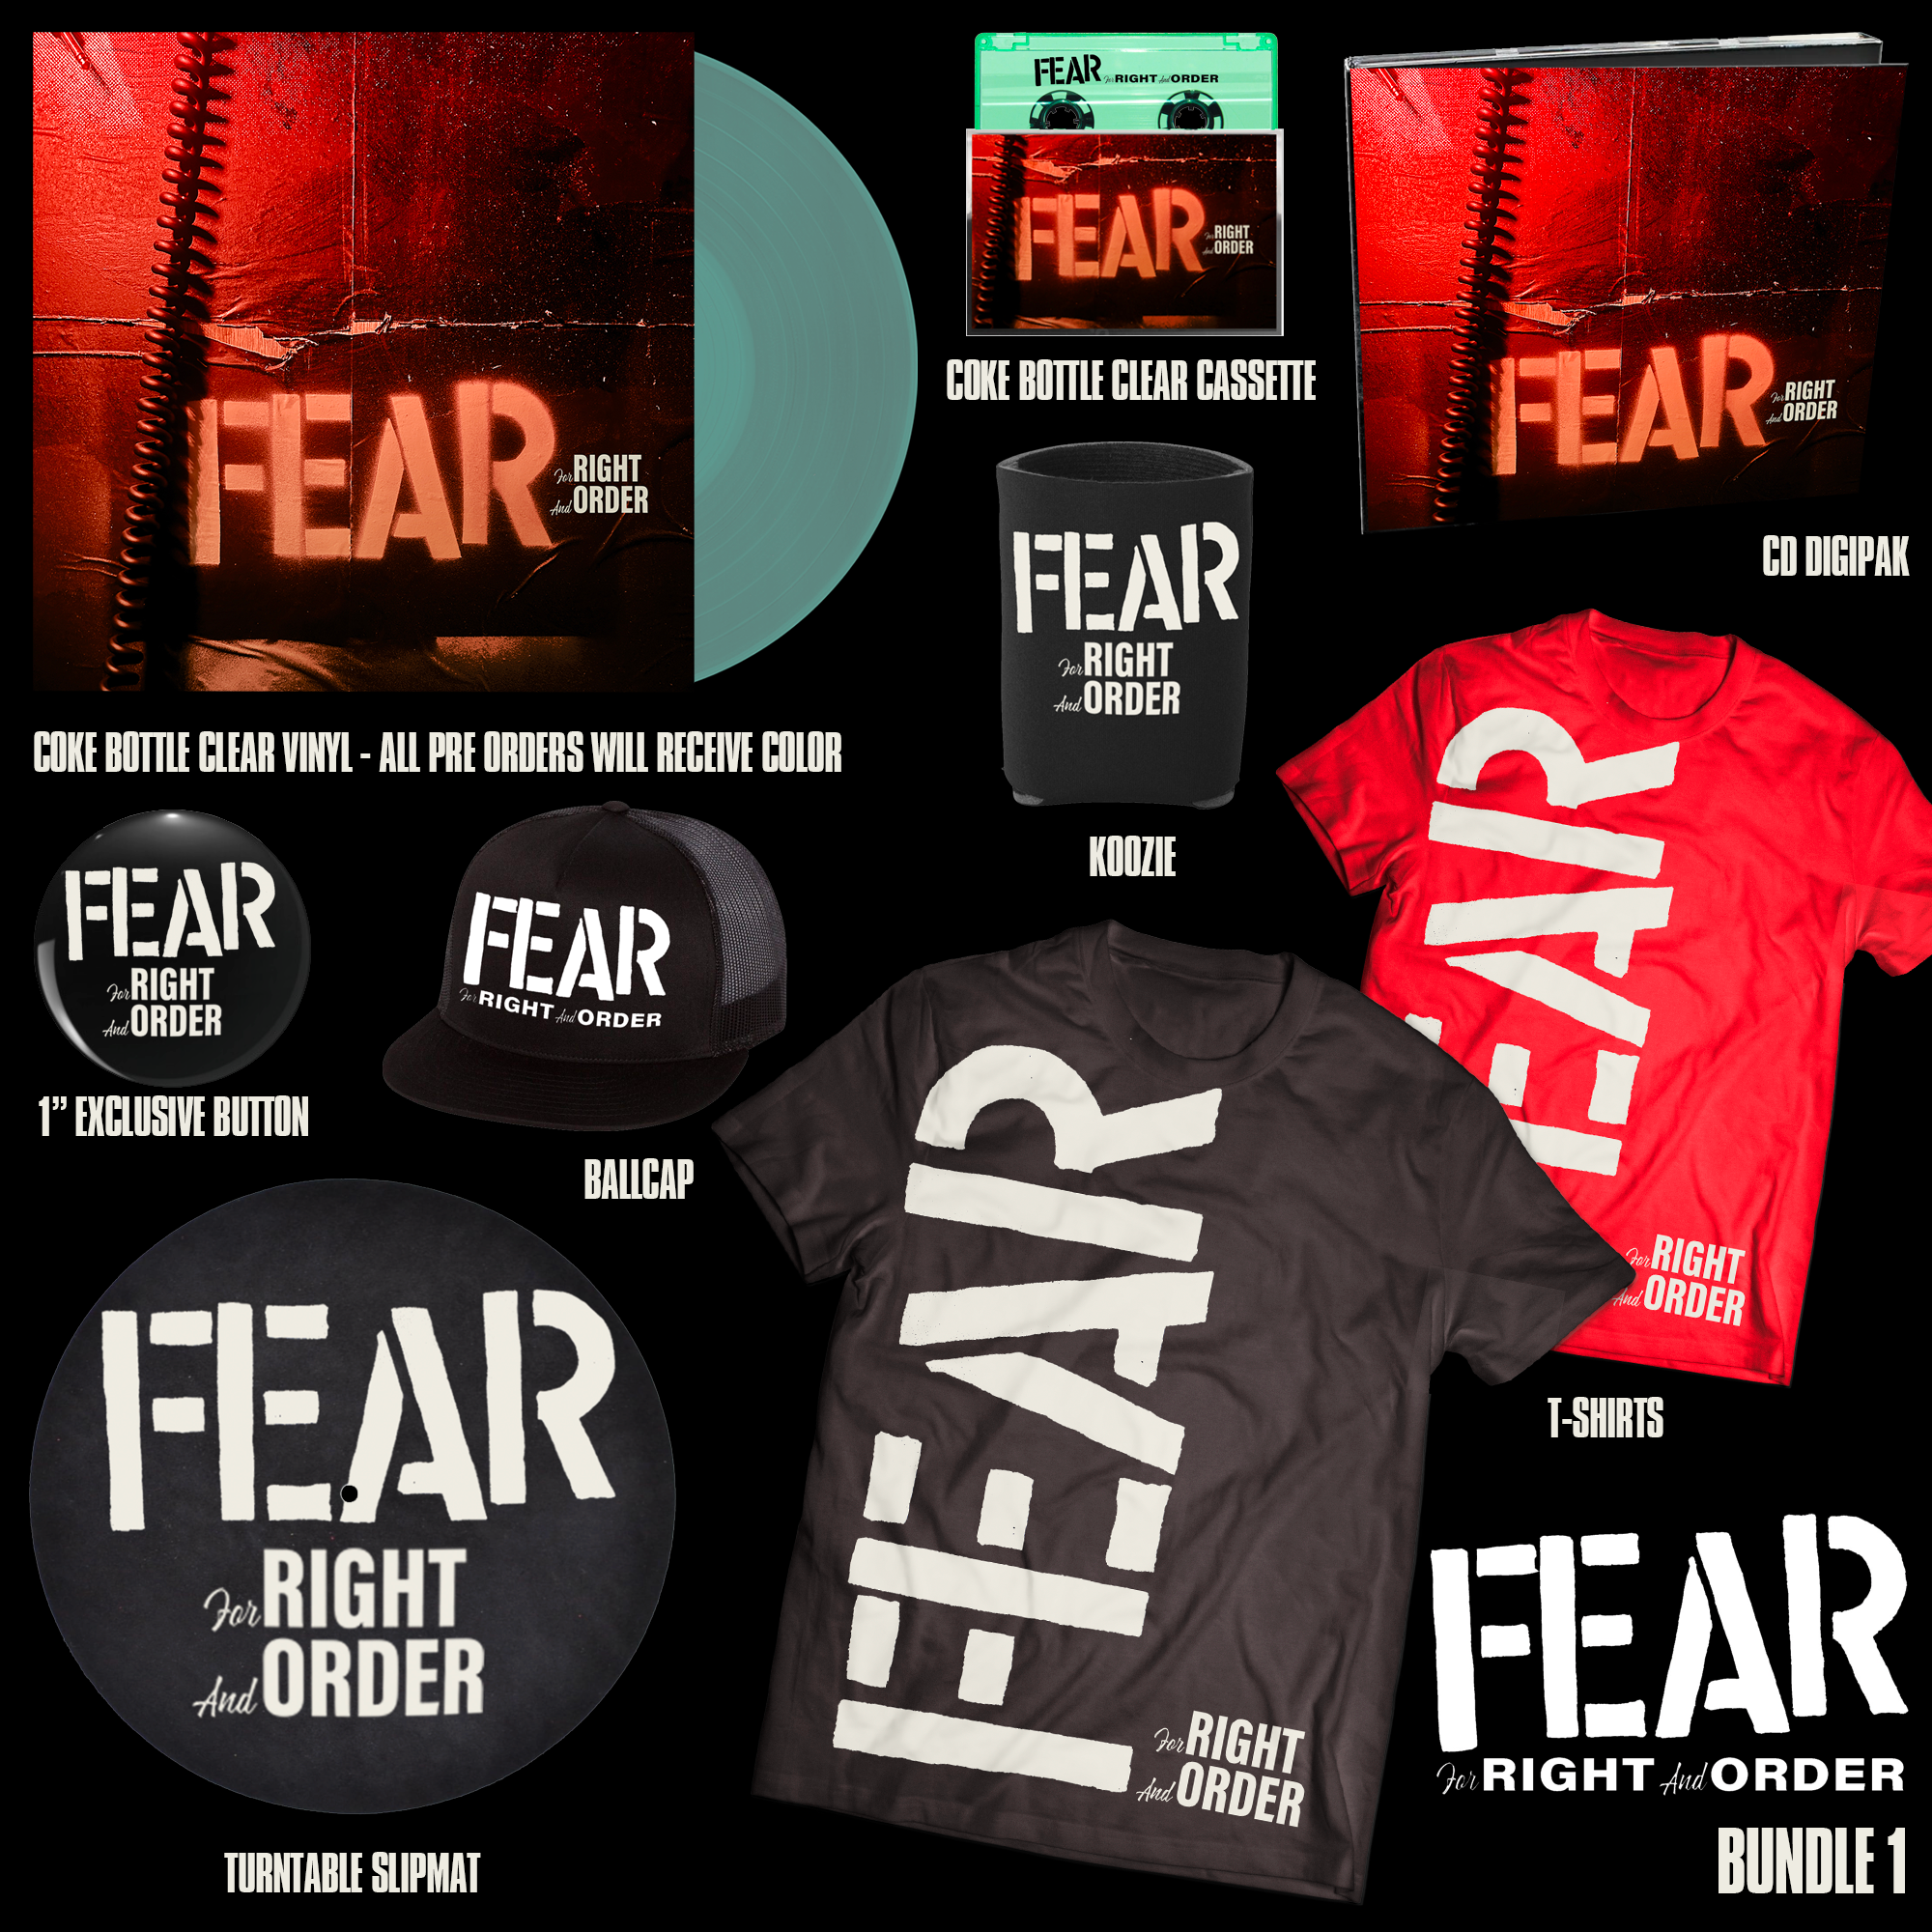 FEAR "FOR RIGHT AND ORDER" LIMITED EDITION DELUXE BUNDLE 1